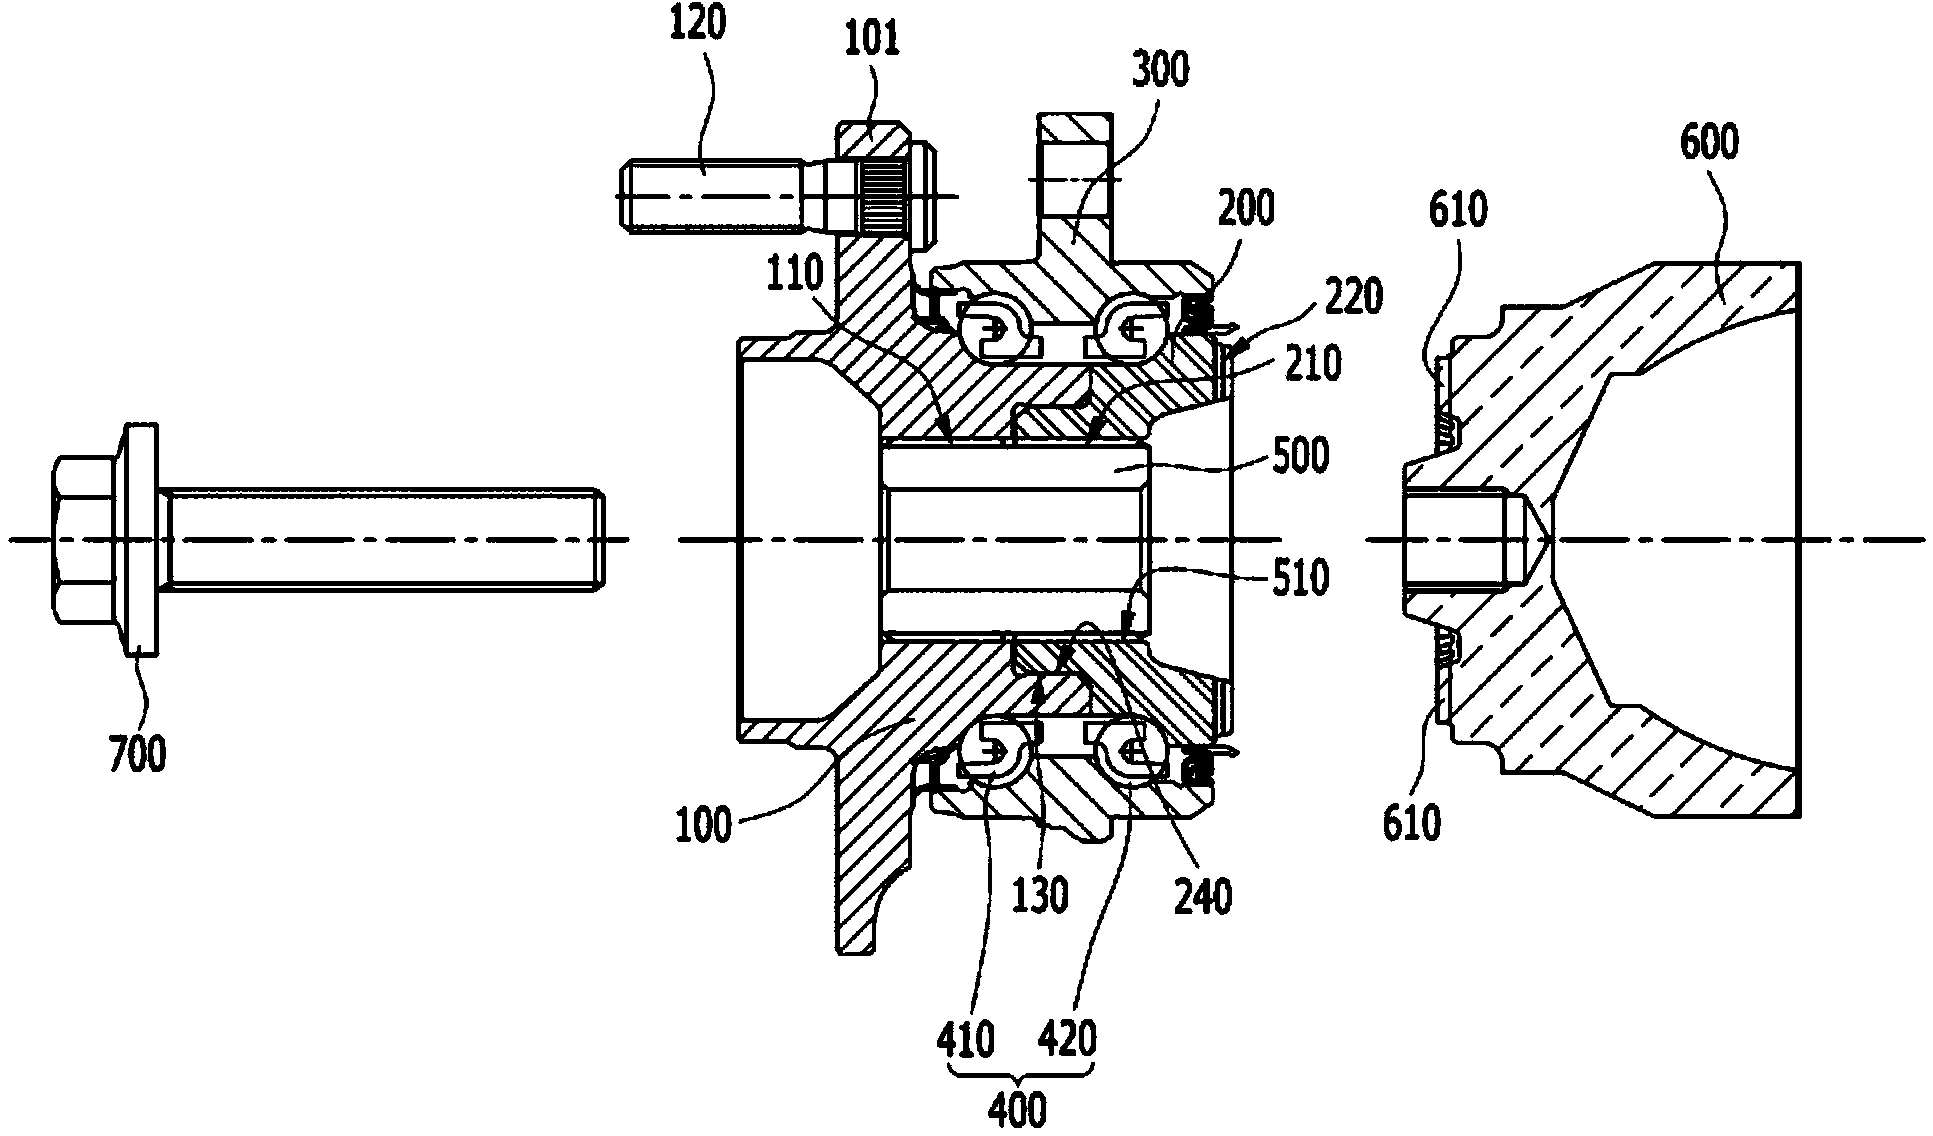 Structure and method for coupling wheel bearings